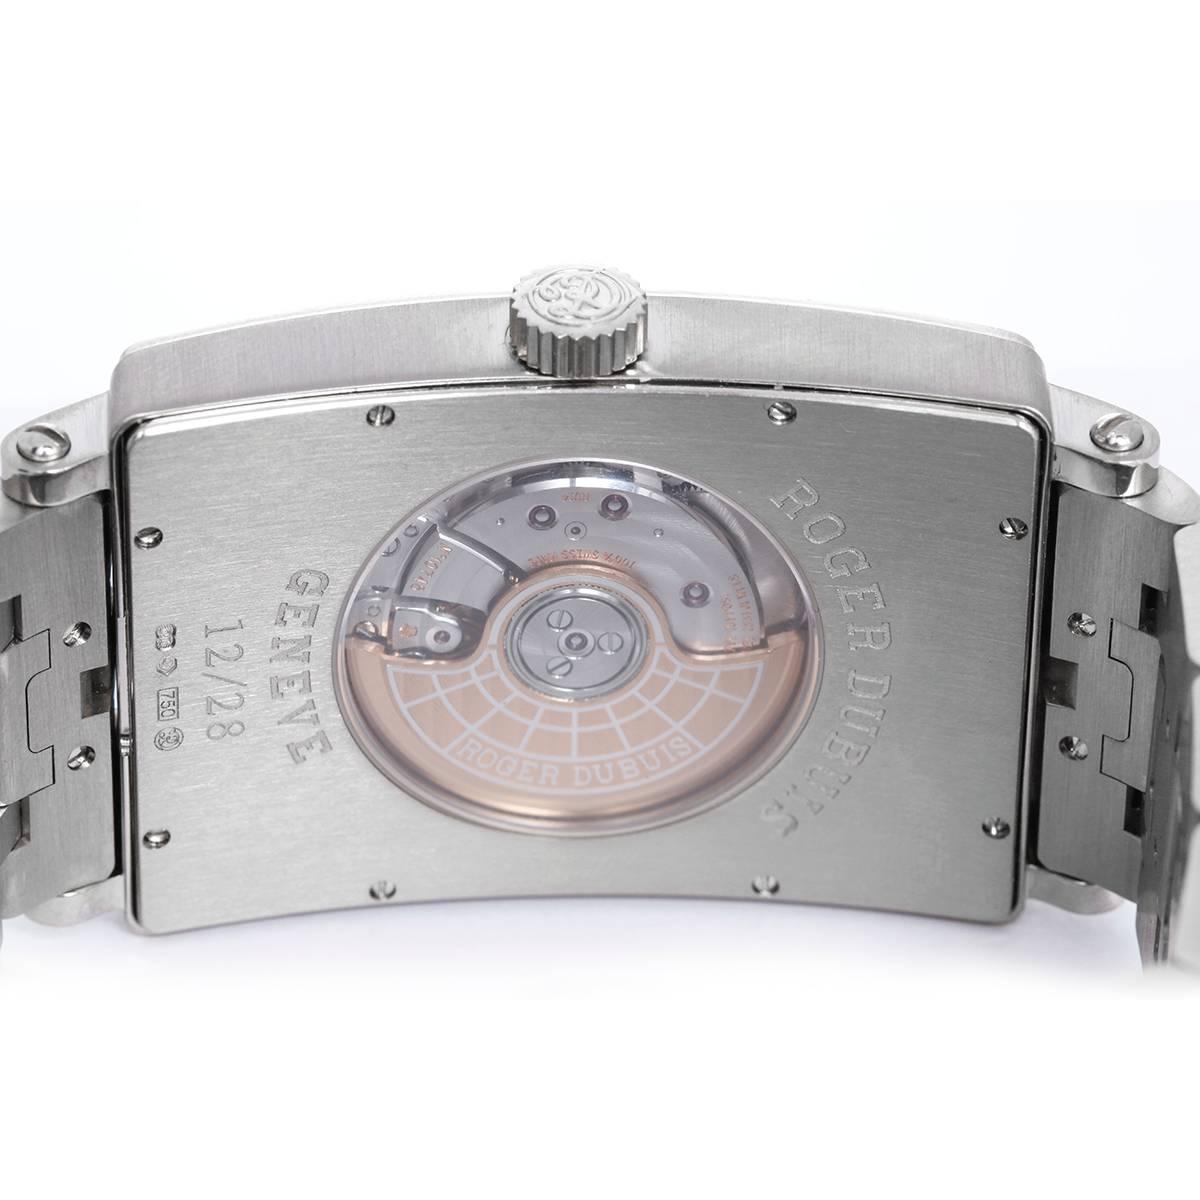 Roger Dubuis Much More 18k White Gold Men's Limited Edition Watch -  Automatic winding. 18k white gold case with diamond bezel (34mm x 46mm). Silvered dial with Roman numerals. Roger Dubuis 18k white gold bracelet. Pre-owned with box and papers. 